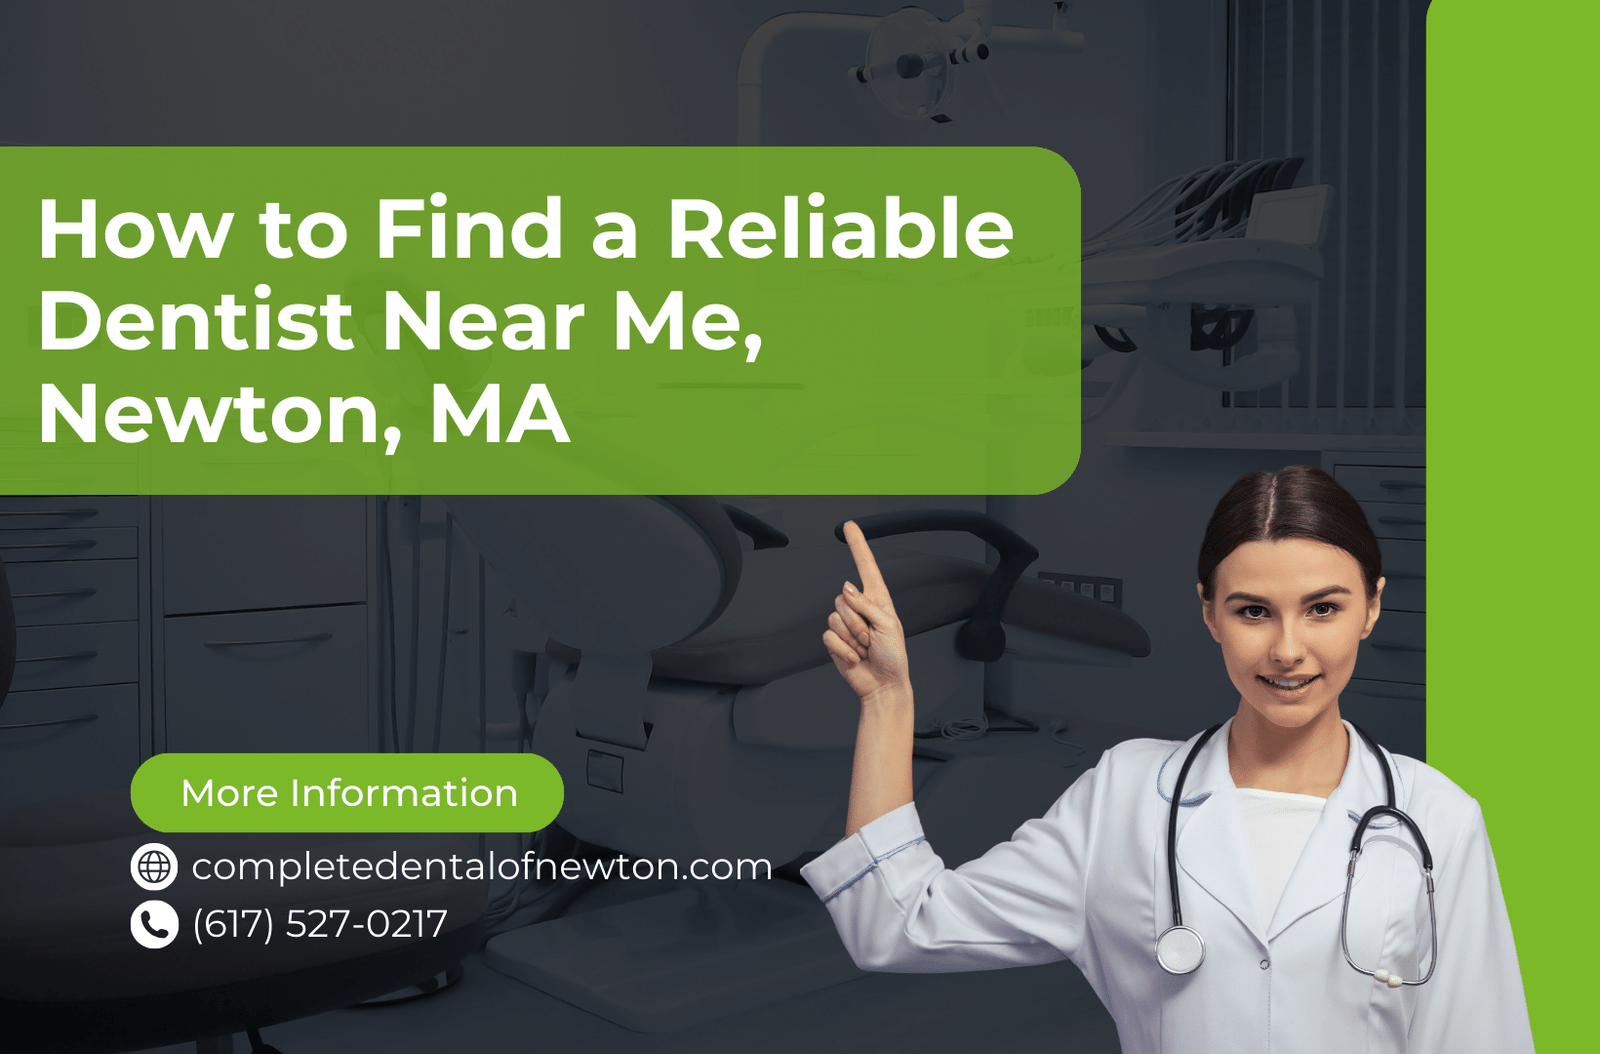 How to Find a Reliable Dentist Near Me, Newton, MA